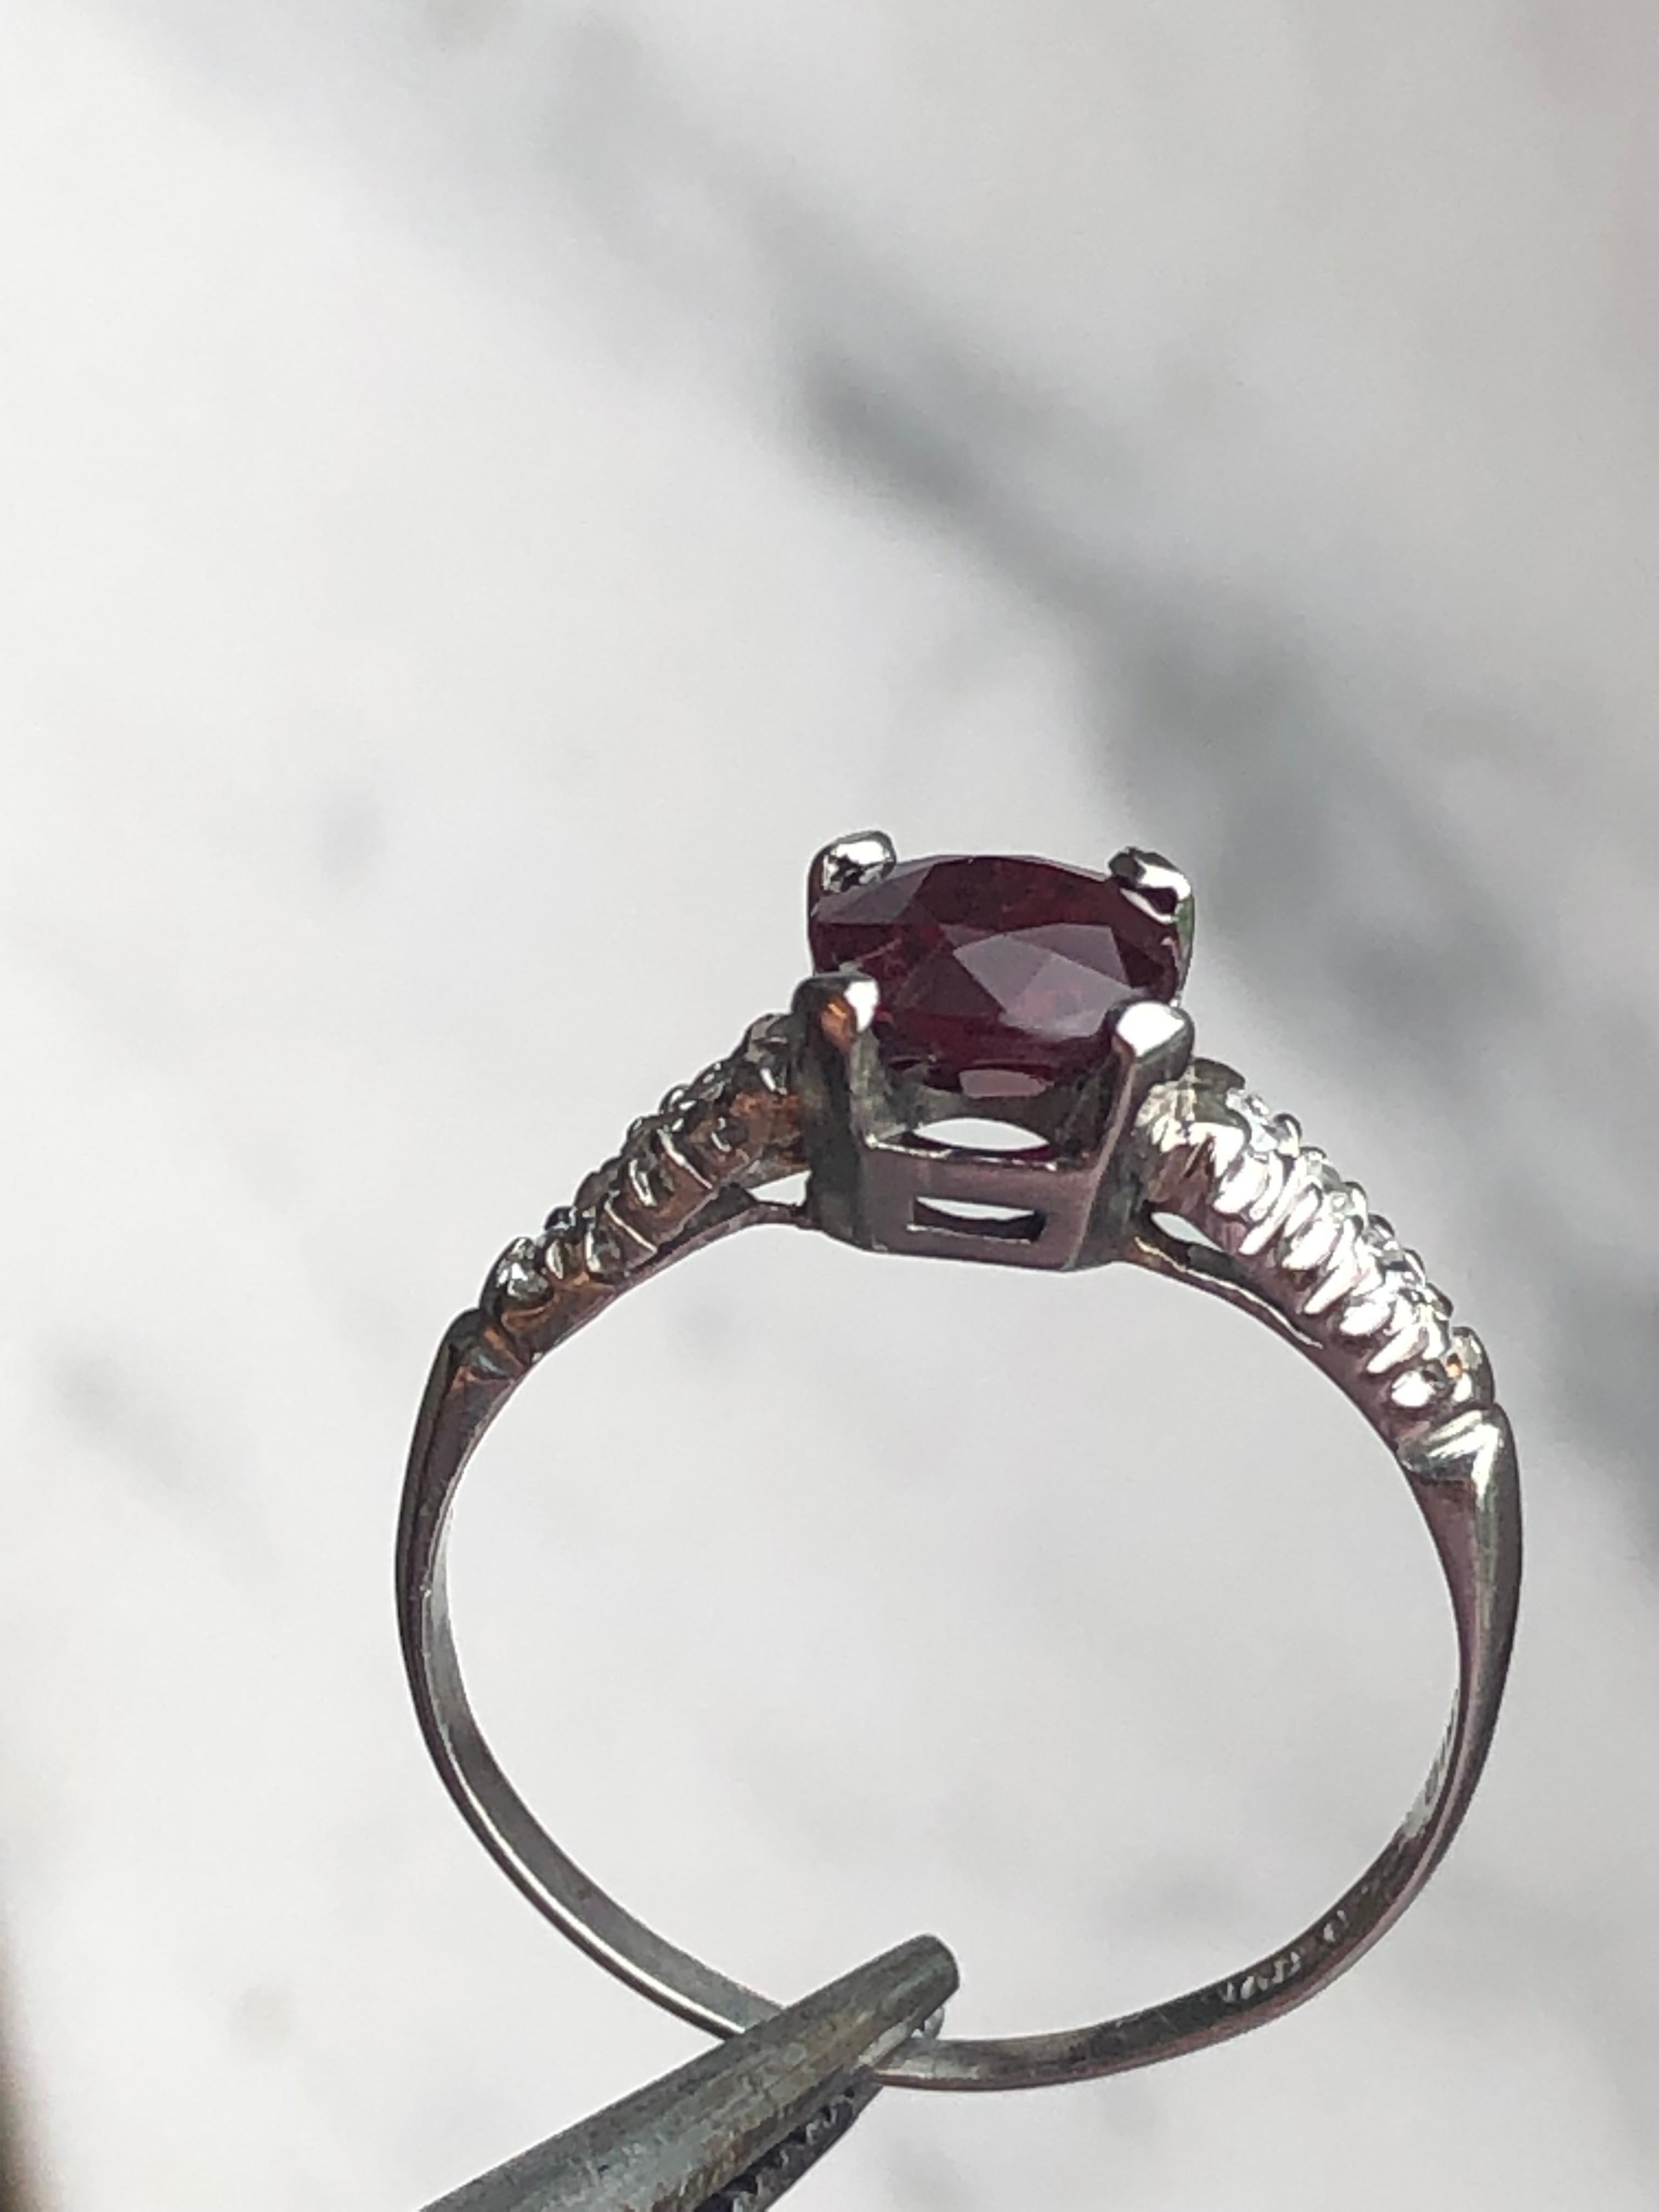 Antique Art Deco Diamond and Ruby Platinum ring
Ruby and diamond dainty ring. antique cushion cut center ruby with six round side diamonds in a platinum dainty setting.  Approx. 1.10 carats total weight.
Size: 6.25 and Stamped: 100% platinum 1.5